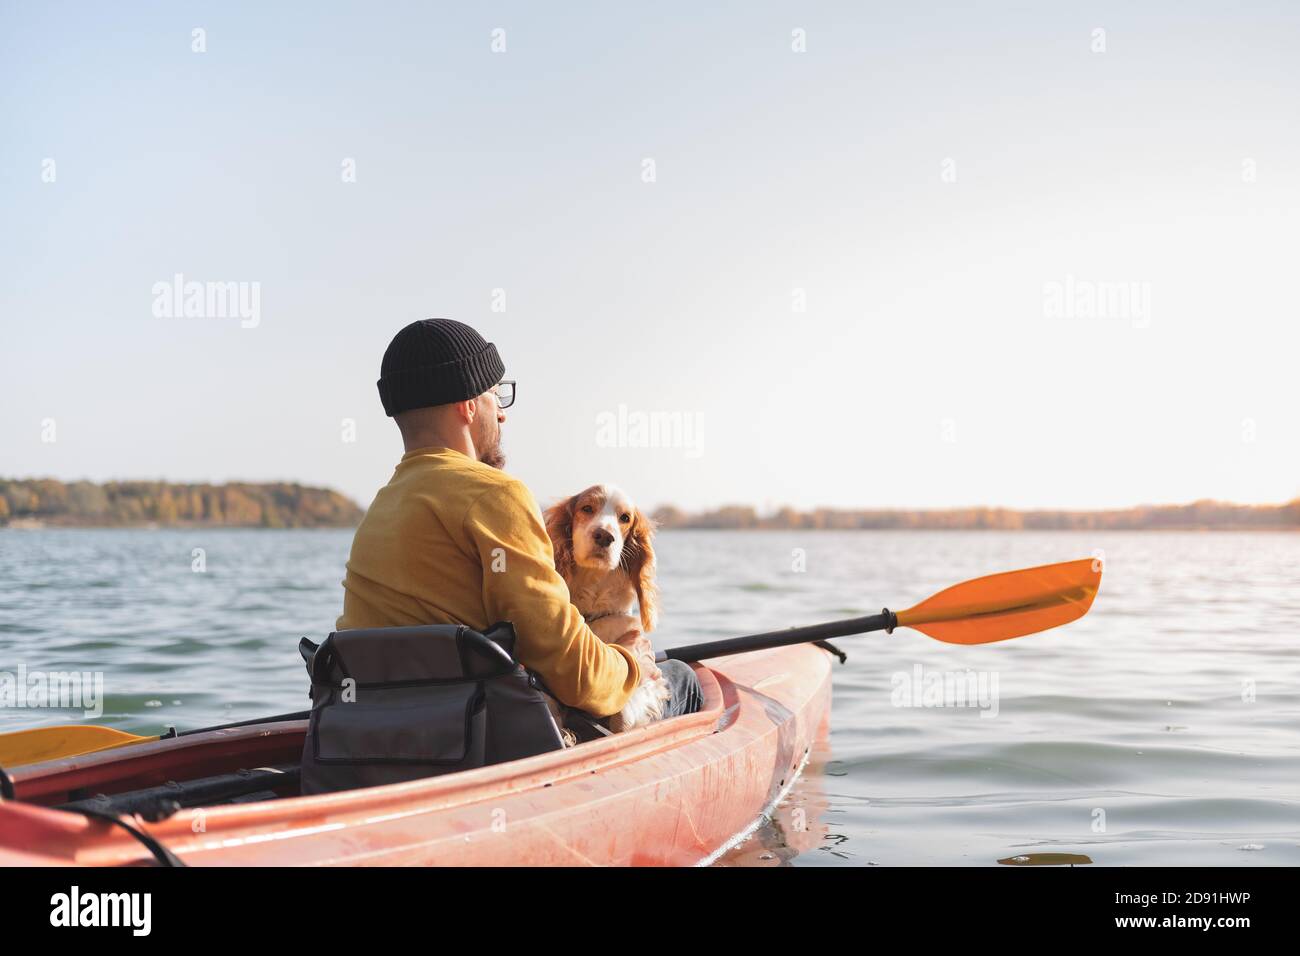 Man with a dog in a canoe on the lake. Young male person with spaniel in a kayak row boat, active free time with pets, companionship, adventure dogs Stock Photo